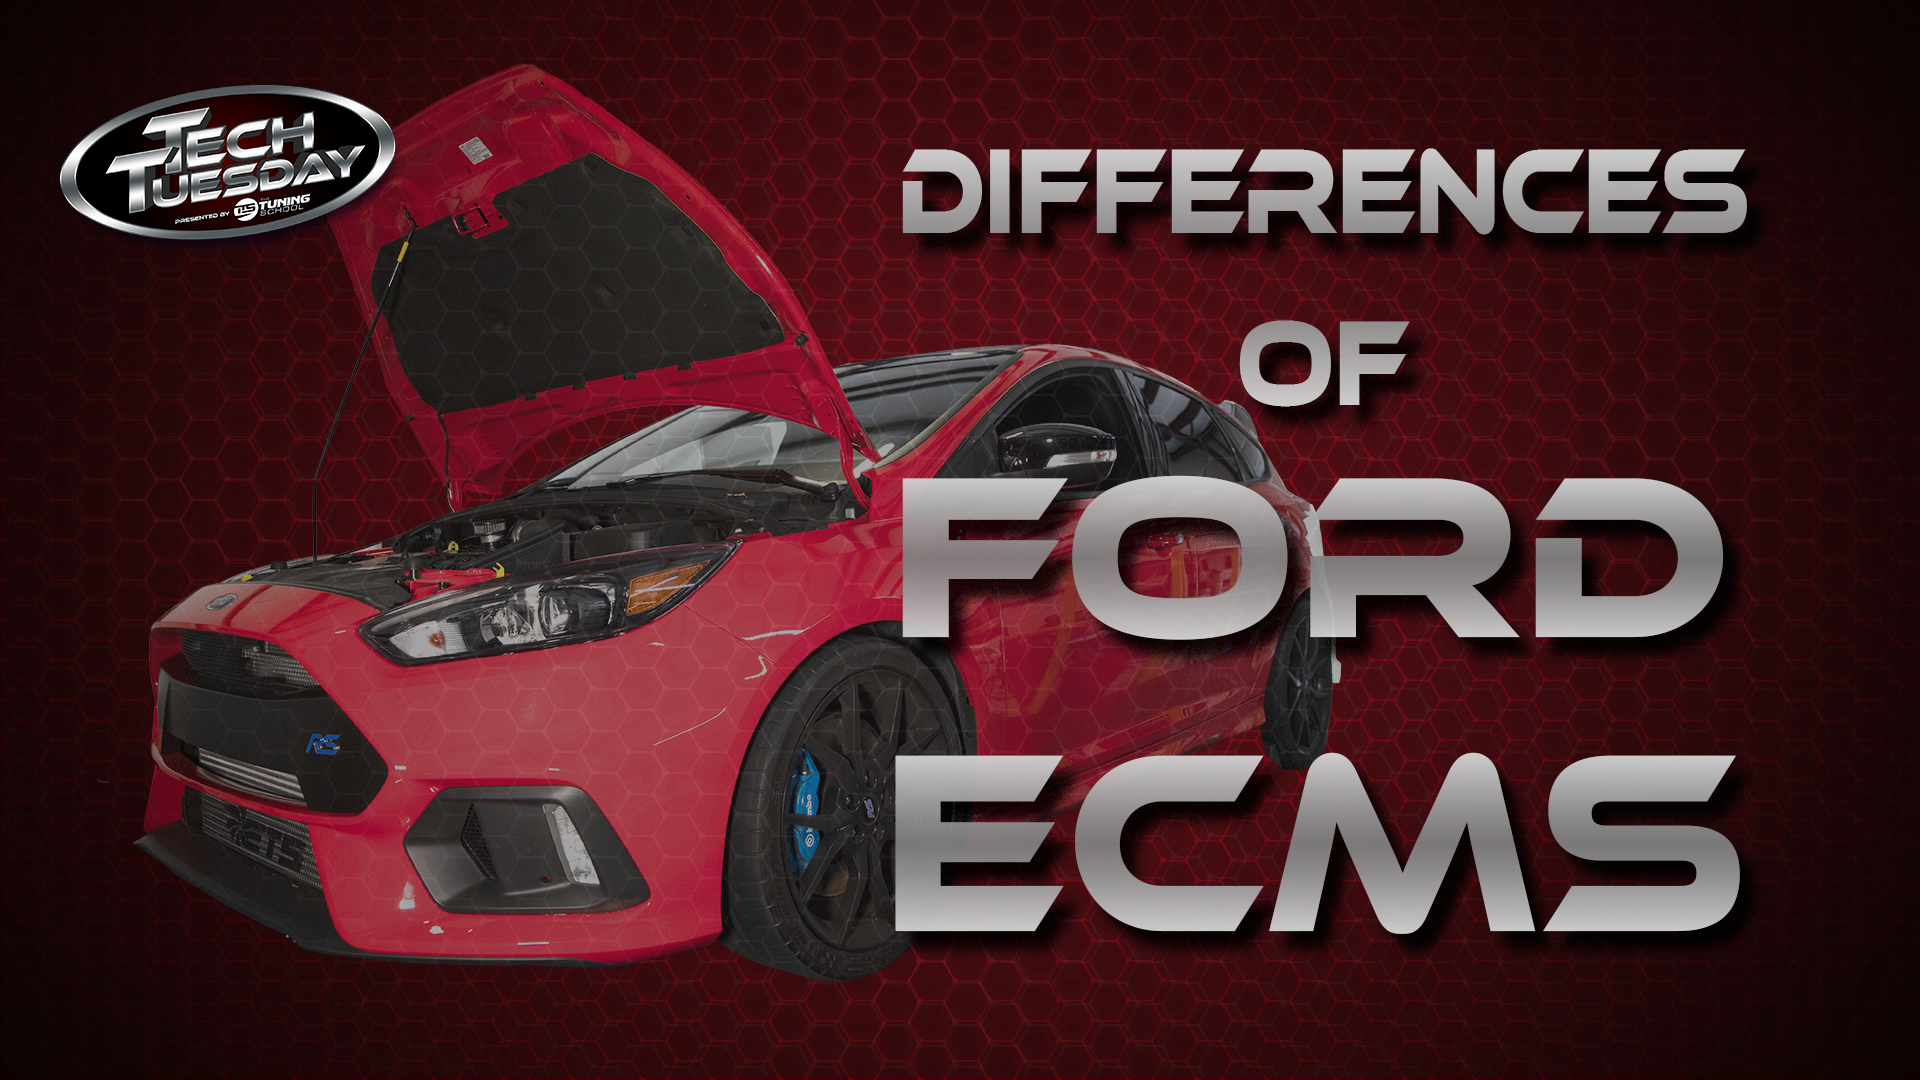 Differences of Ford ECMs